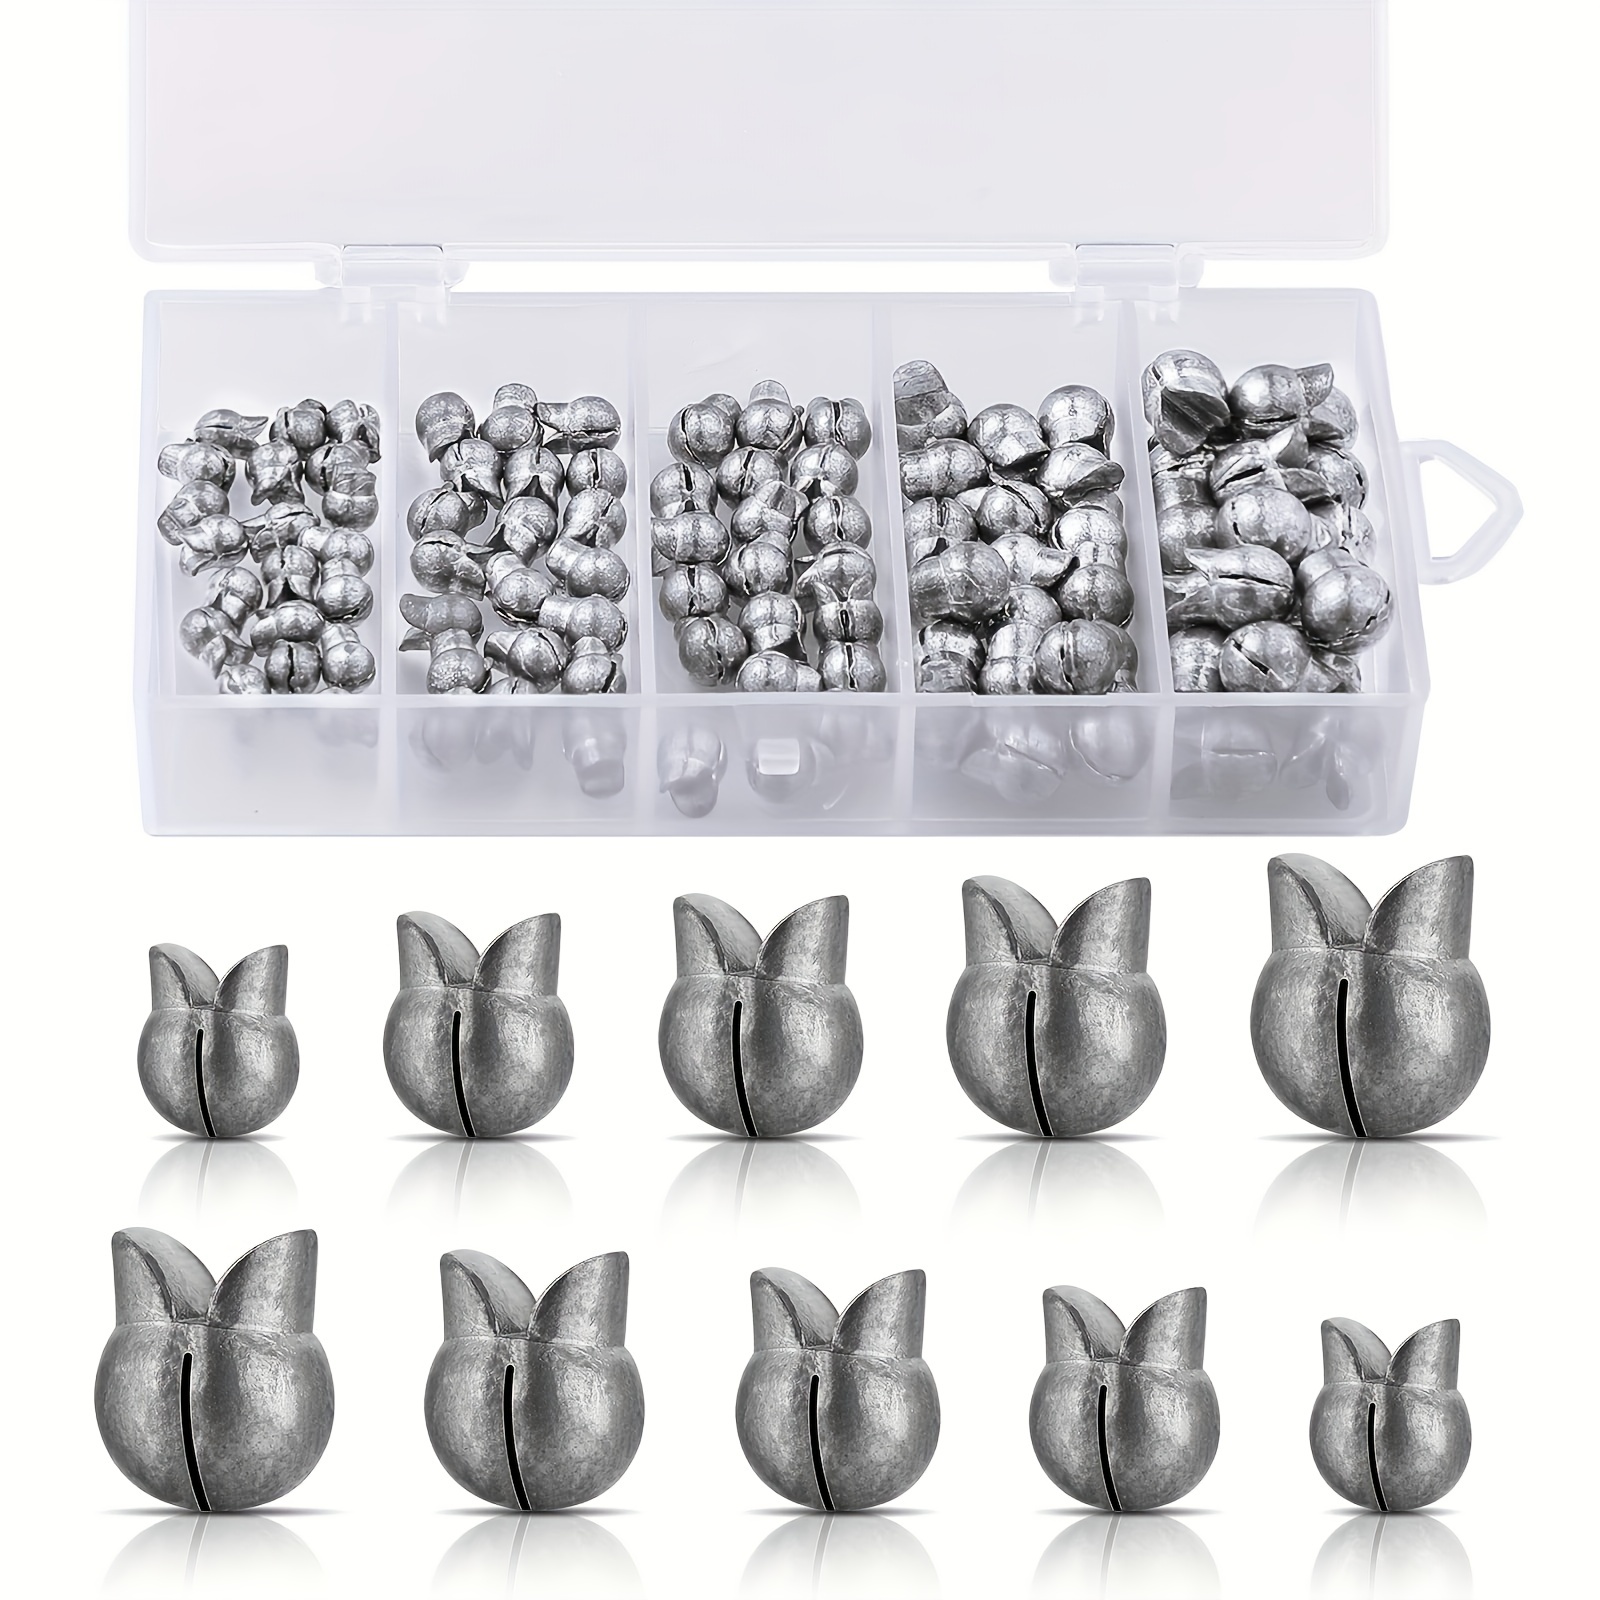 100Pcs Practical Lead Weight Time Saving Small Fishing Sinker Mold